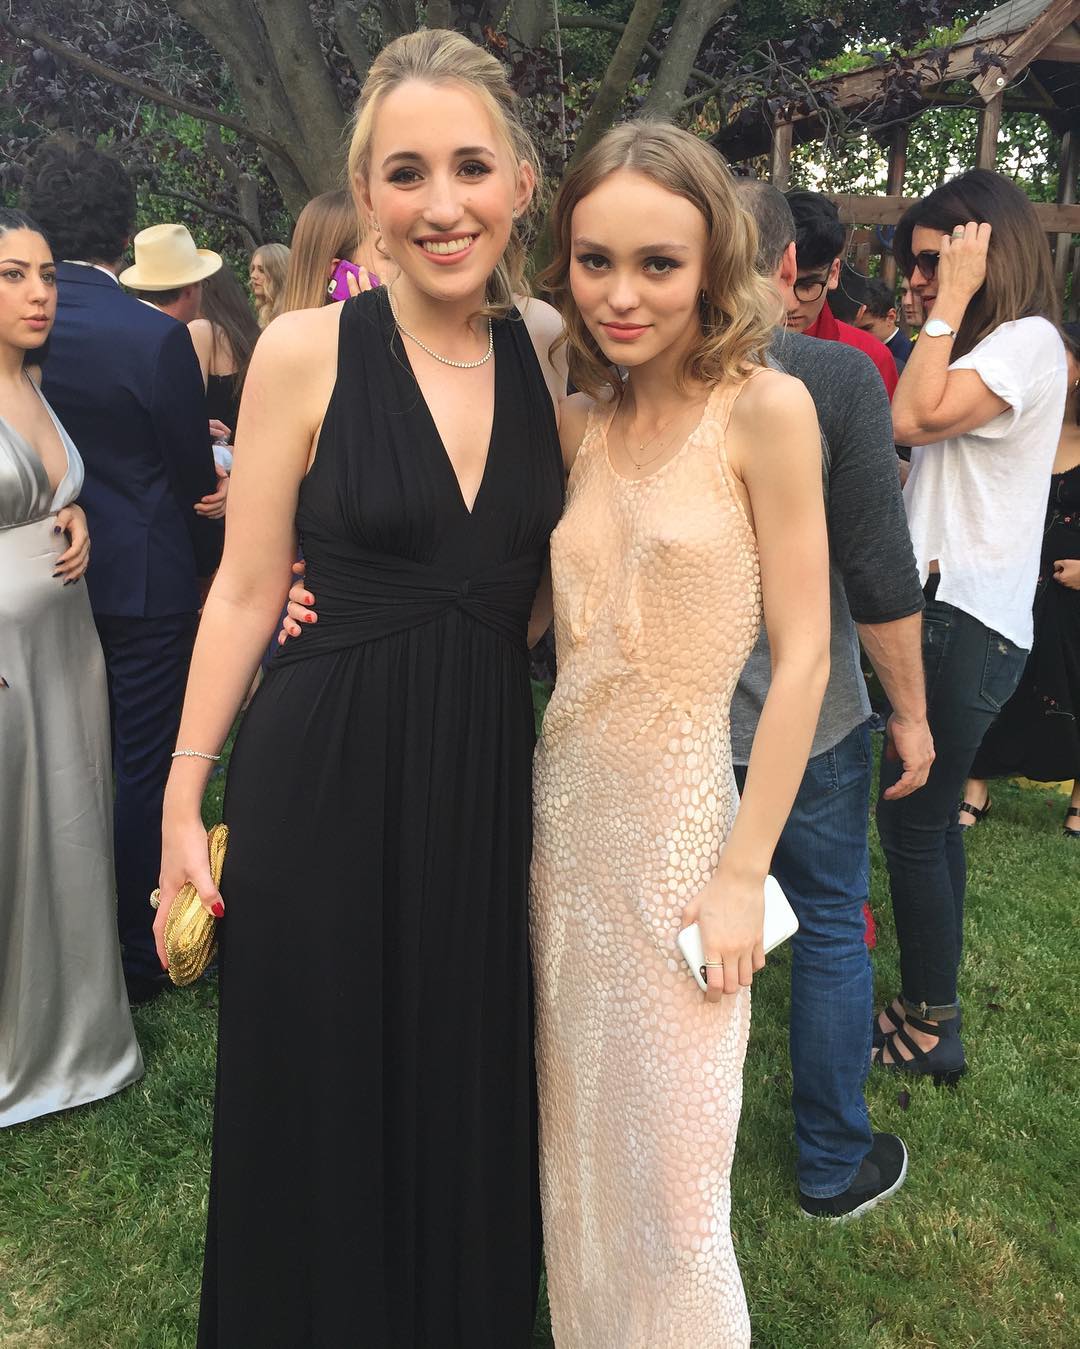 Lily-Rose Depp attended the prom in 2016 while she was struggling with weight loss.